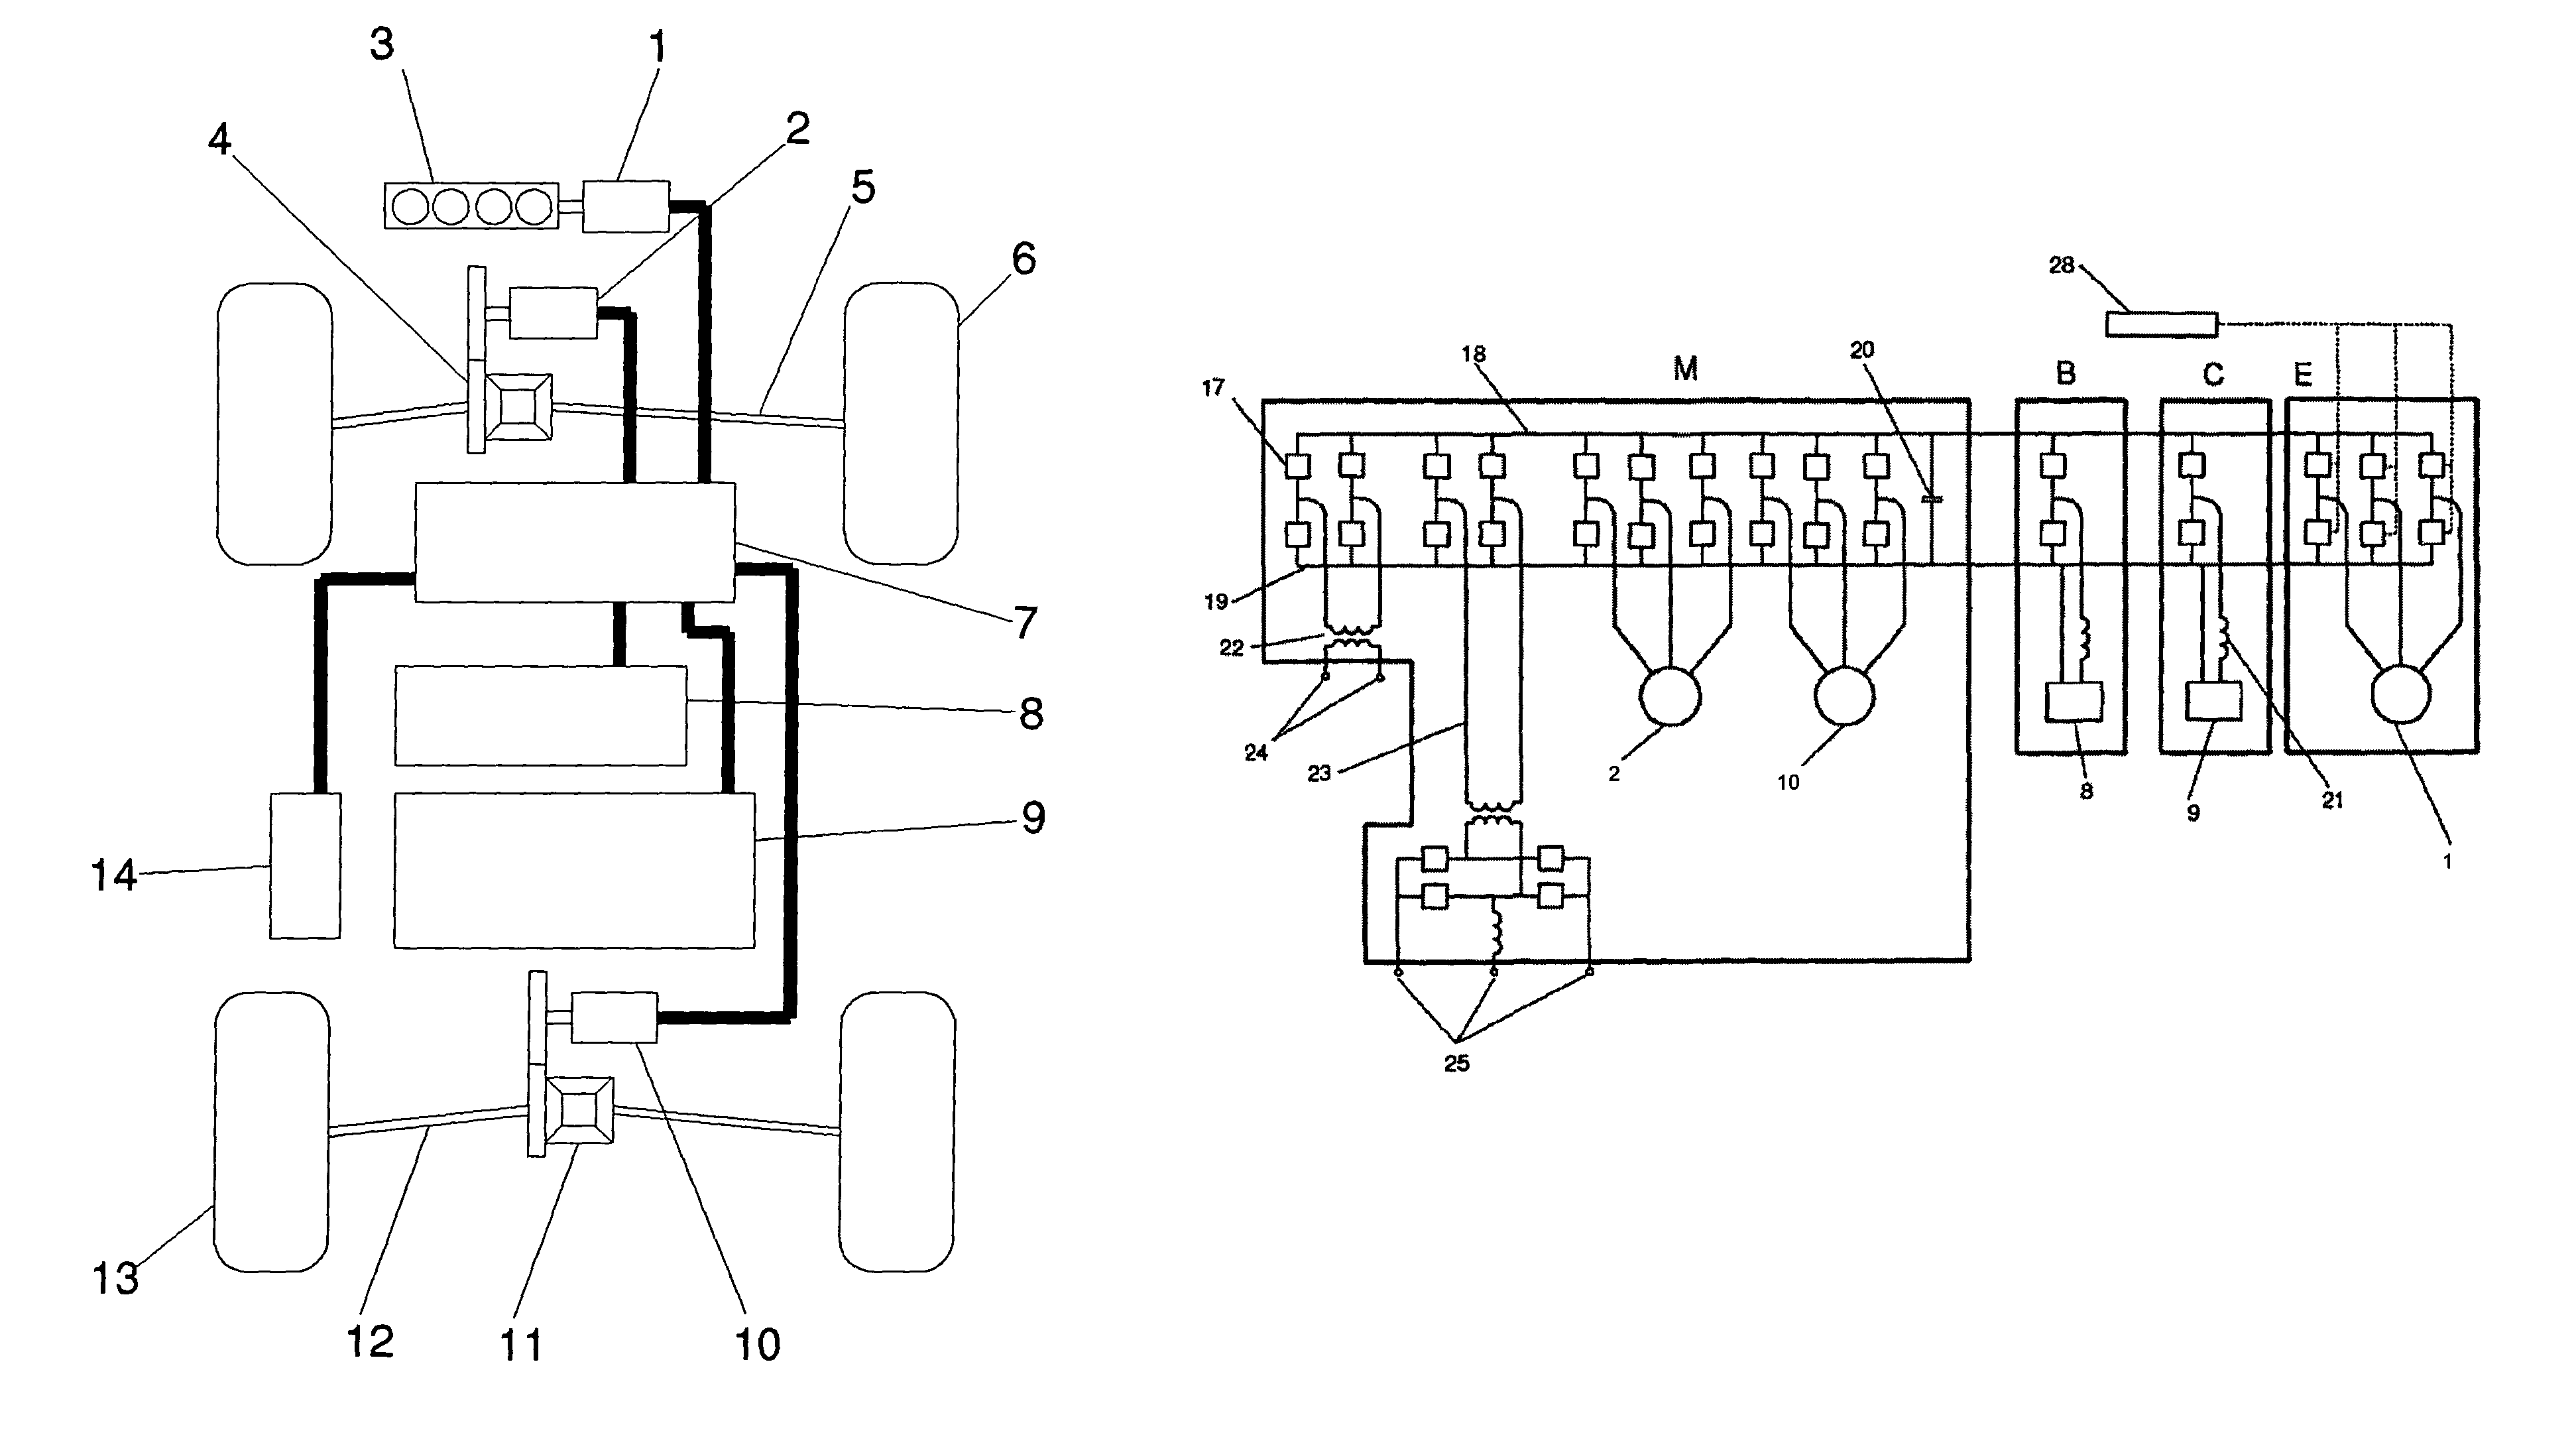 Method and apparatus for power electronics and control of plug-in hybrid propulsion with fast energy storage